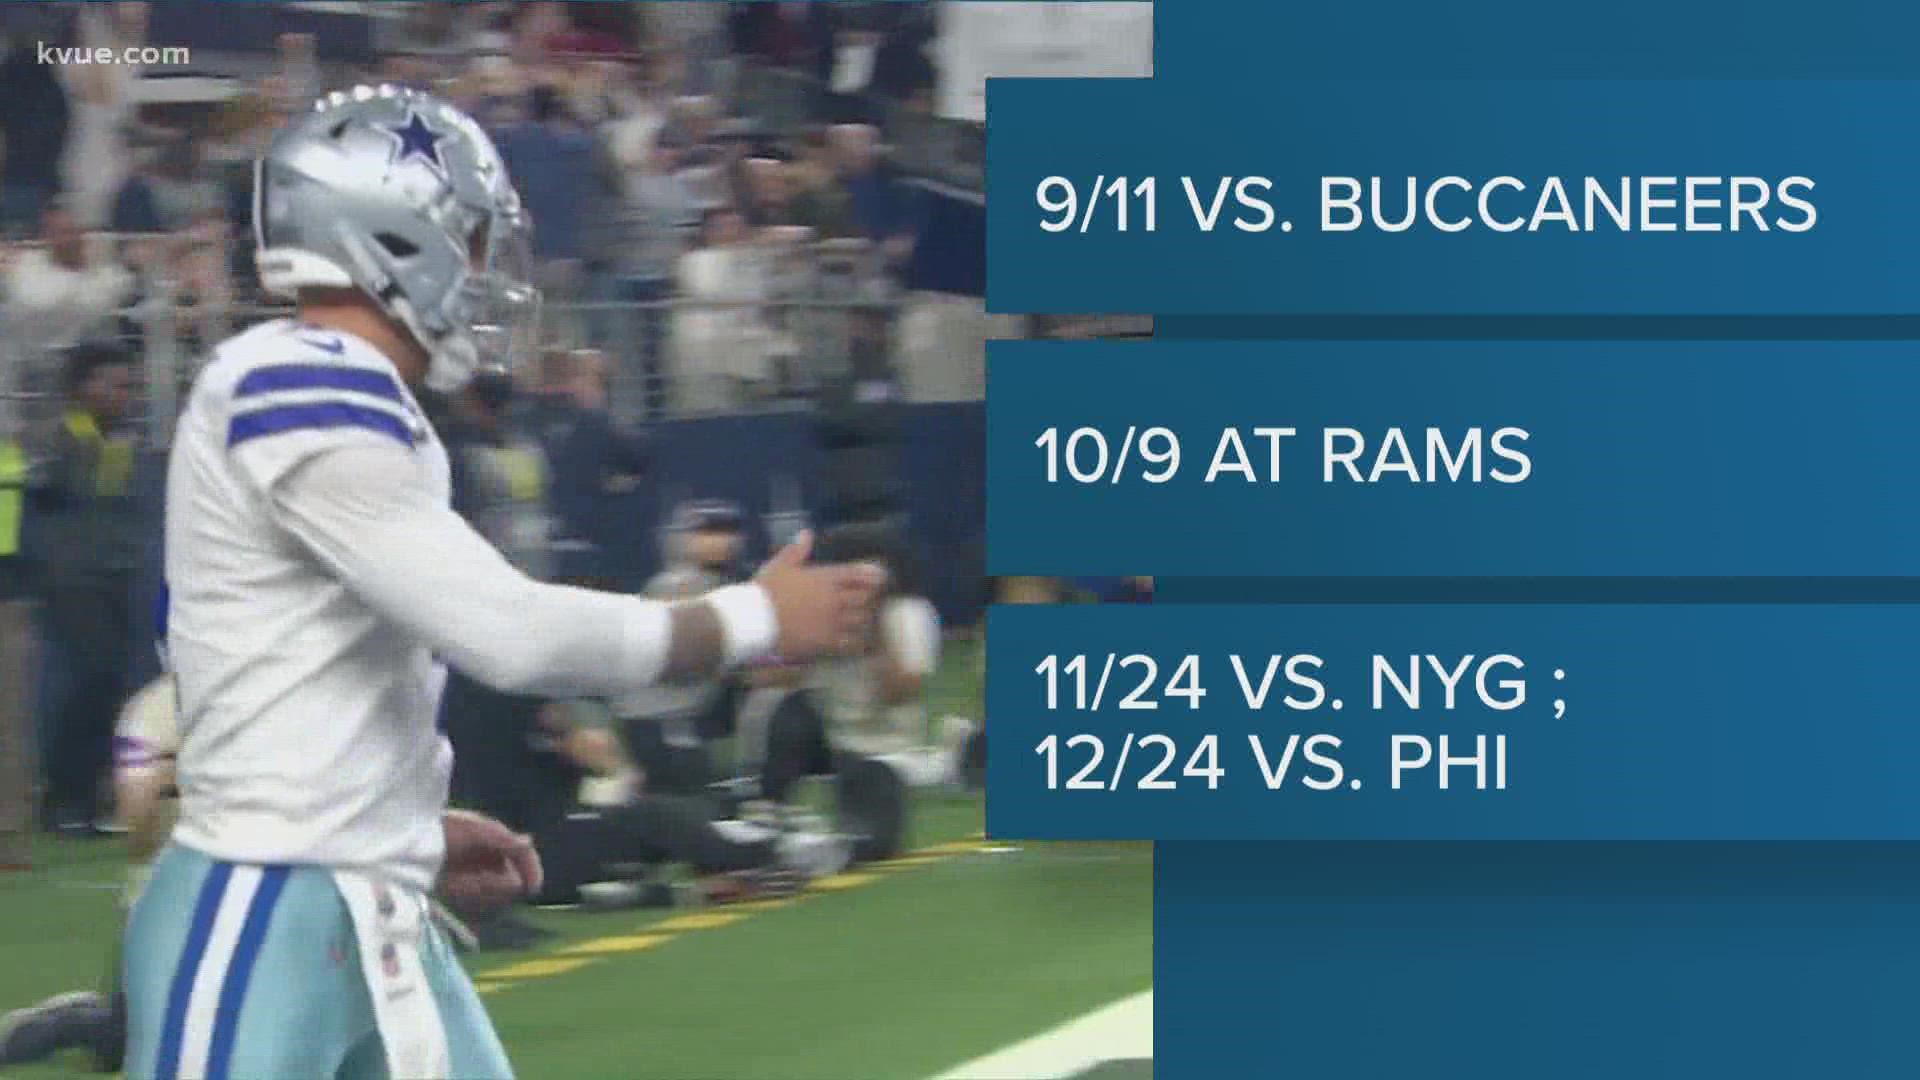 The Cowboys are also set to face the Rams, the defending champions, on Oct. 9.